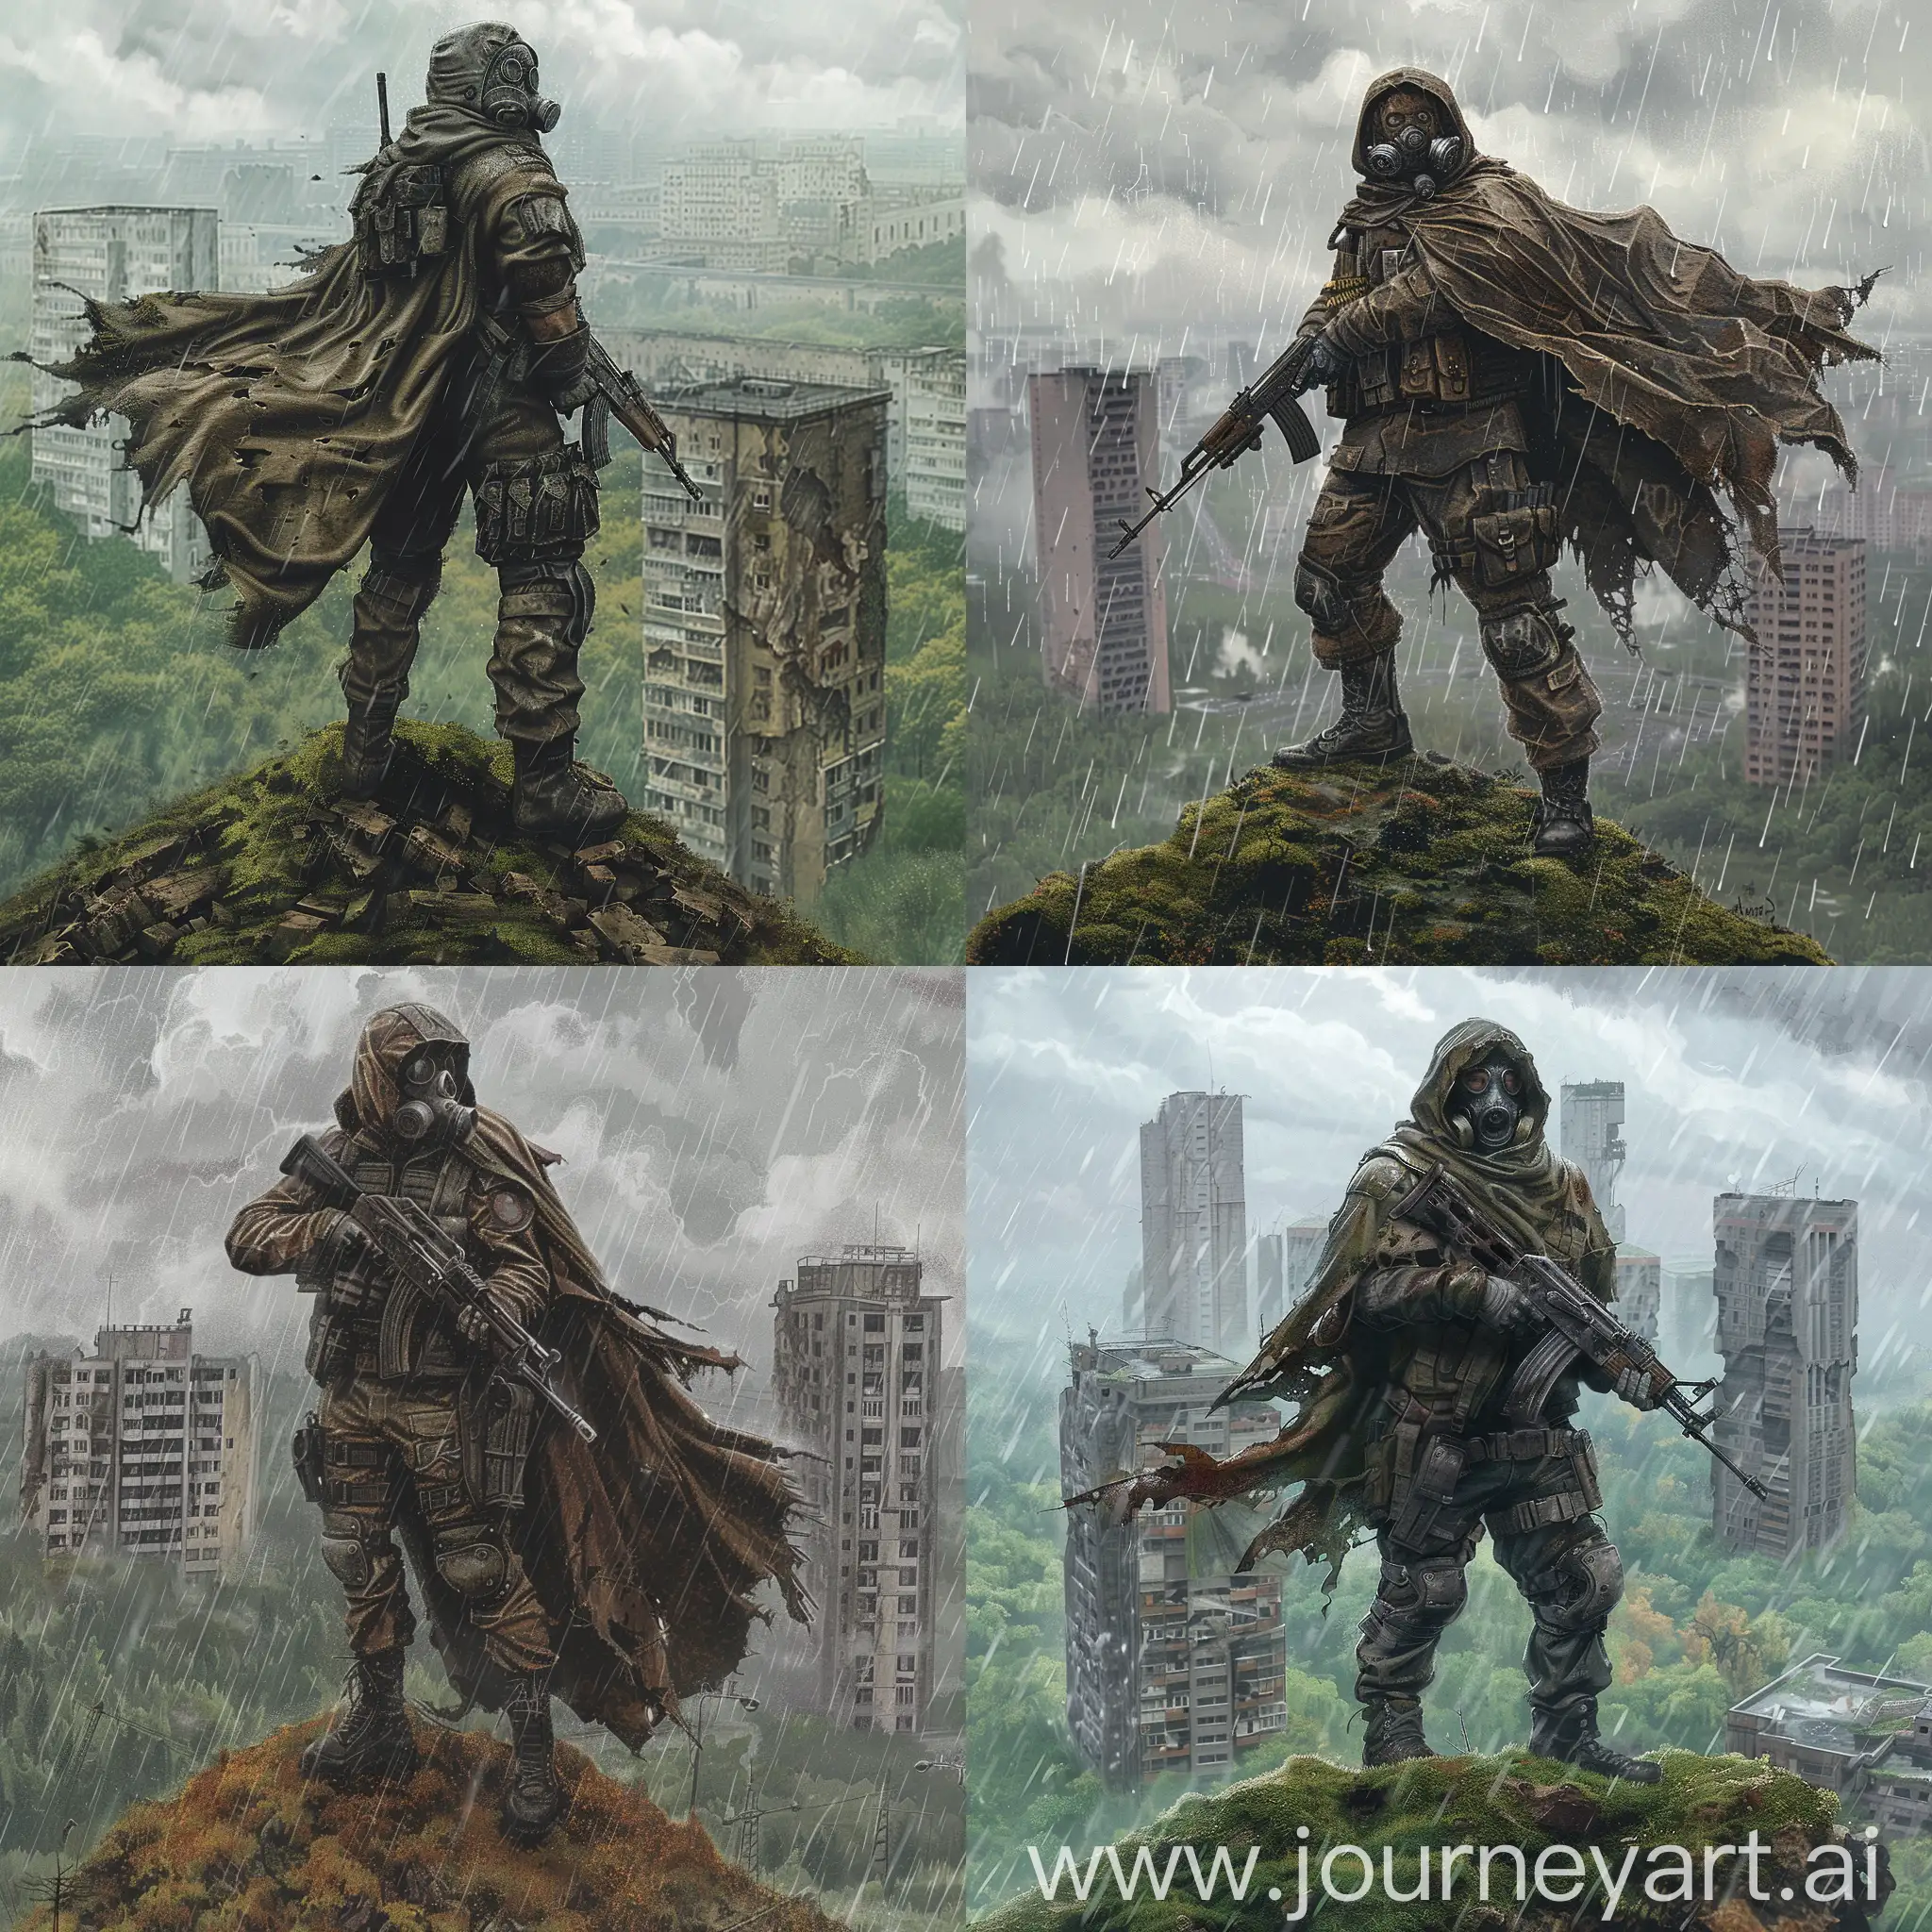 Draw a stalker standing on top of a hill in the style of S.T.A.L.K.E.R.. He is wearing battered armor consisting of a leather jacket, gas mask and army pants. He holds a Kalashnikov assault rifle in his hands and looks into the distance. Abandoned soviet Pripyat city buildings overgrown with moss, other signs of destruction rise behind the stalker, the sky is covered with heavy clouds, and it is raining, his cloak is fluttering in the wind, the image should convey the atmosphere of loneliness, danger and post-apocalypse, characteristic of the S.T.A.L.K.E.R. series of games, soviet style illustration.